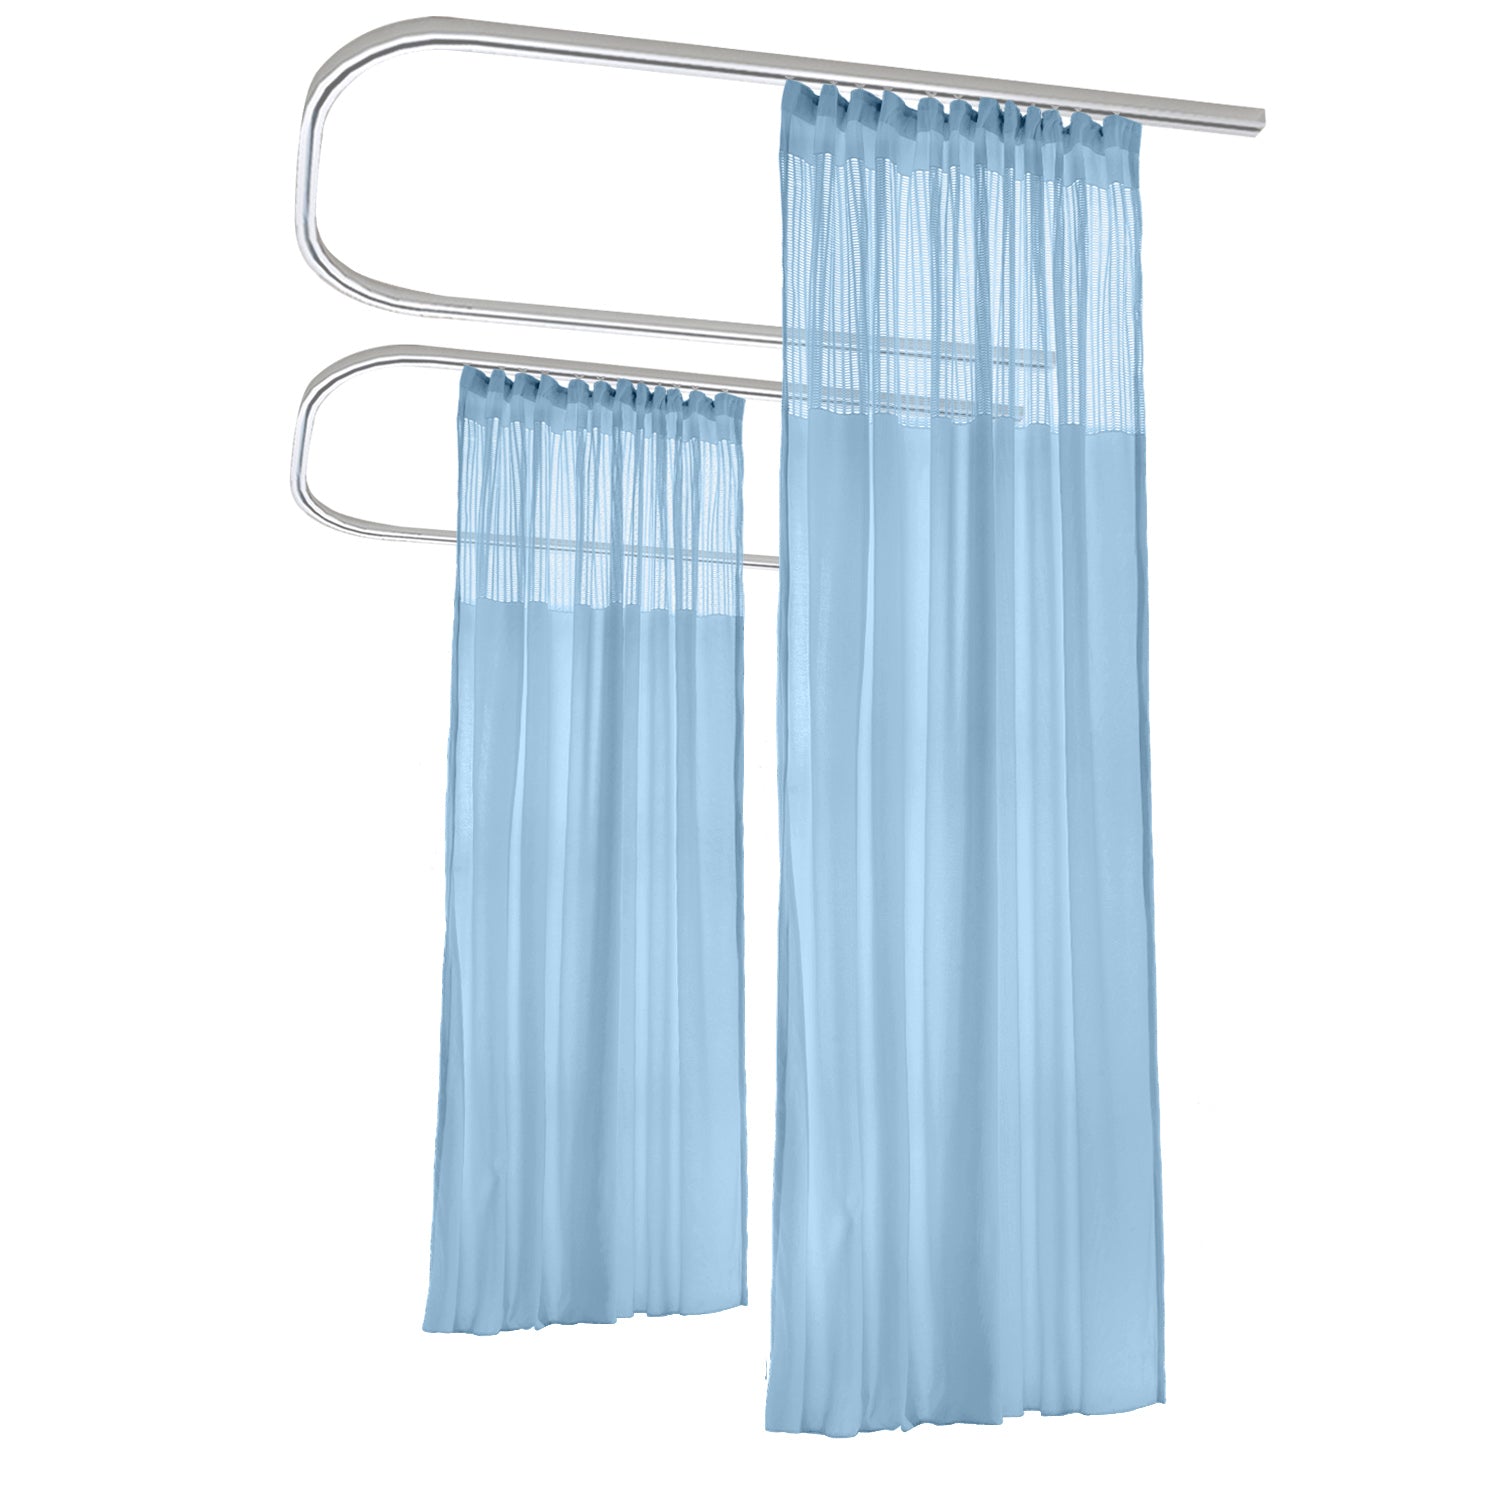 High Quality Hooks Shower Curtain Medical 4 Level Waterproof Flame  Antimicrobial of Hospital Plastic - China Medical Curtain, Hospital Curtain